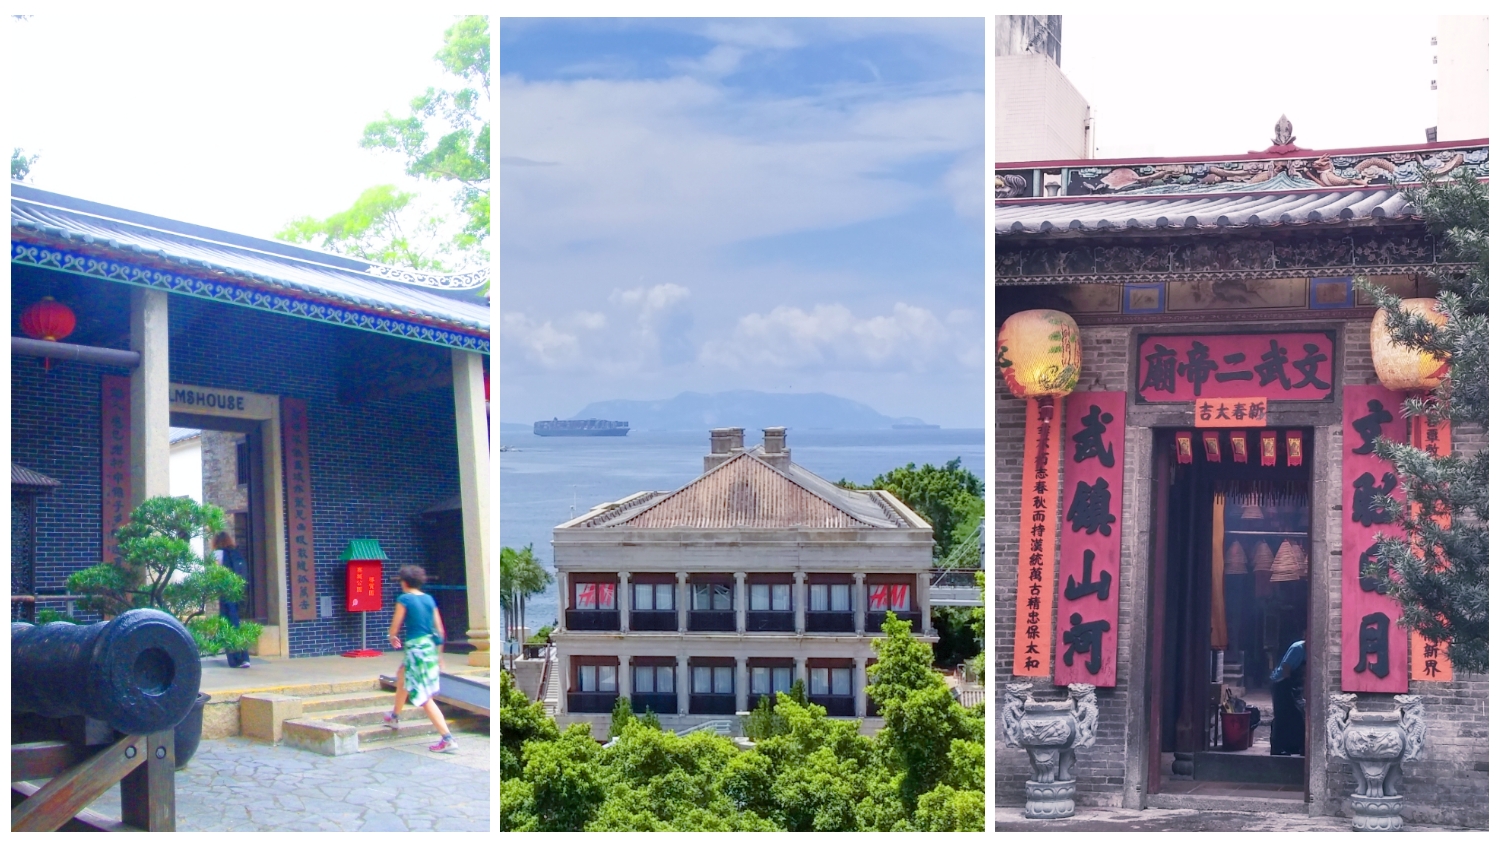 Frank shows attractions with Hong Kong colonial history